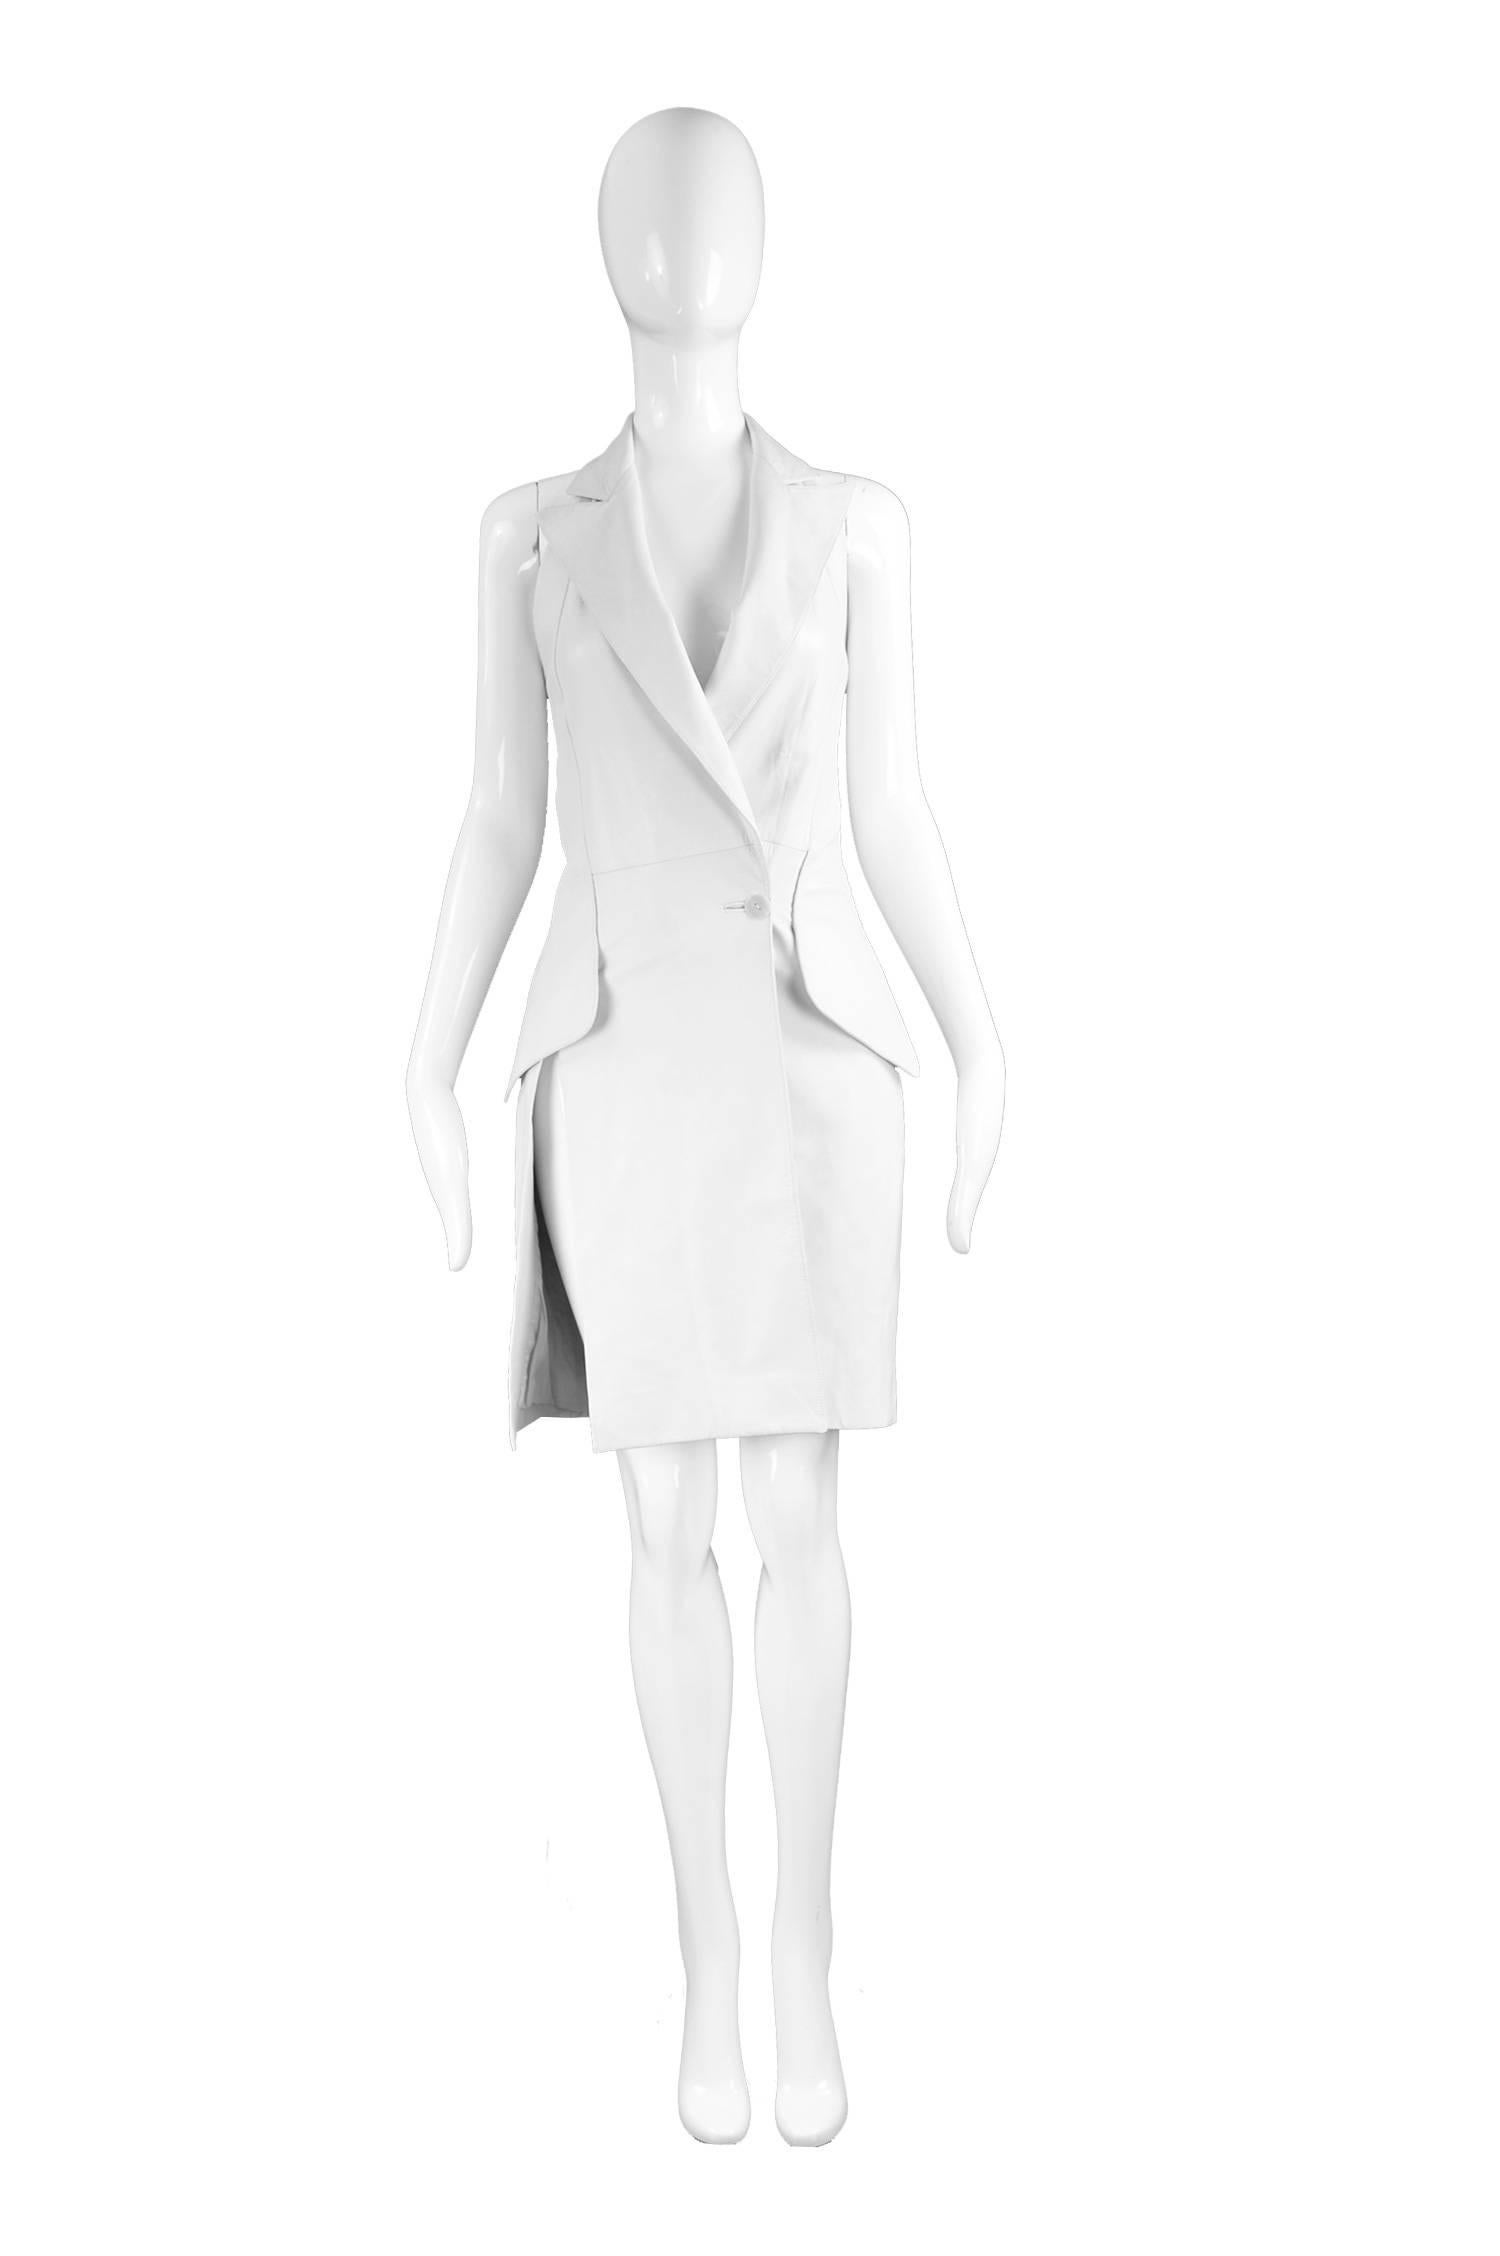 Alexander McQueen for Givenchy Couture 'Cowgirls' White Leather Dress, S/S 1998

Estimated Size: UK 10/ US 6/ EU 38. Please check measurements to ensure fit. 
Bust - 34” / 86cm
Waist - 28” / 71cm
Hips - 36” / 91cm
Length (Bust to Hem) - 27” /